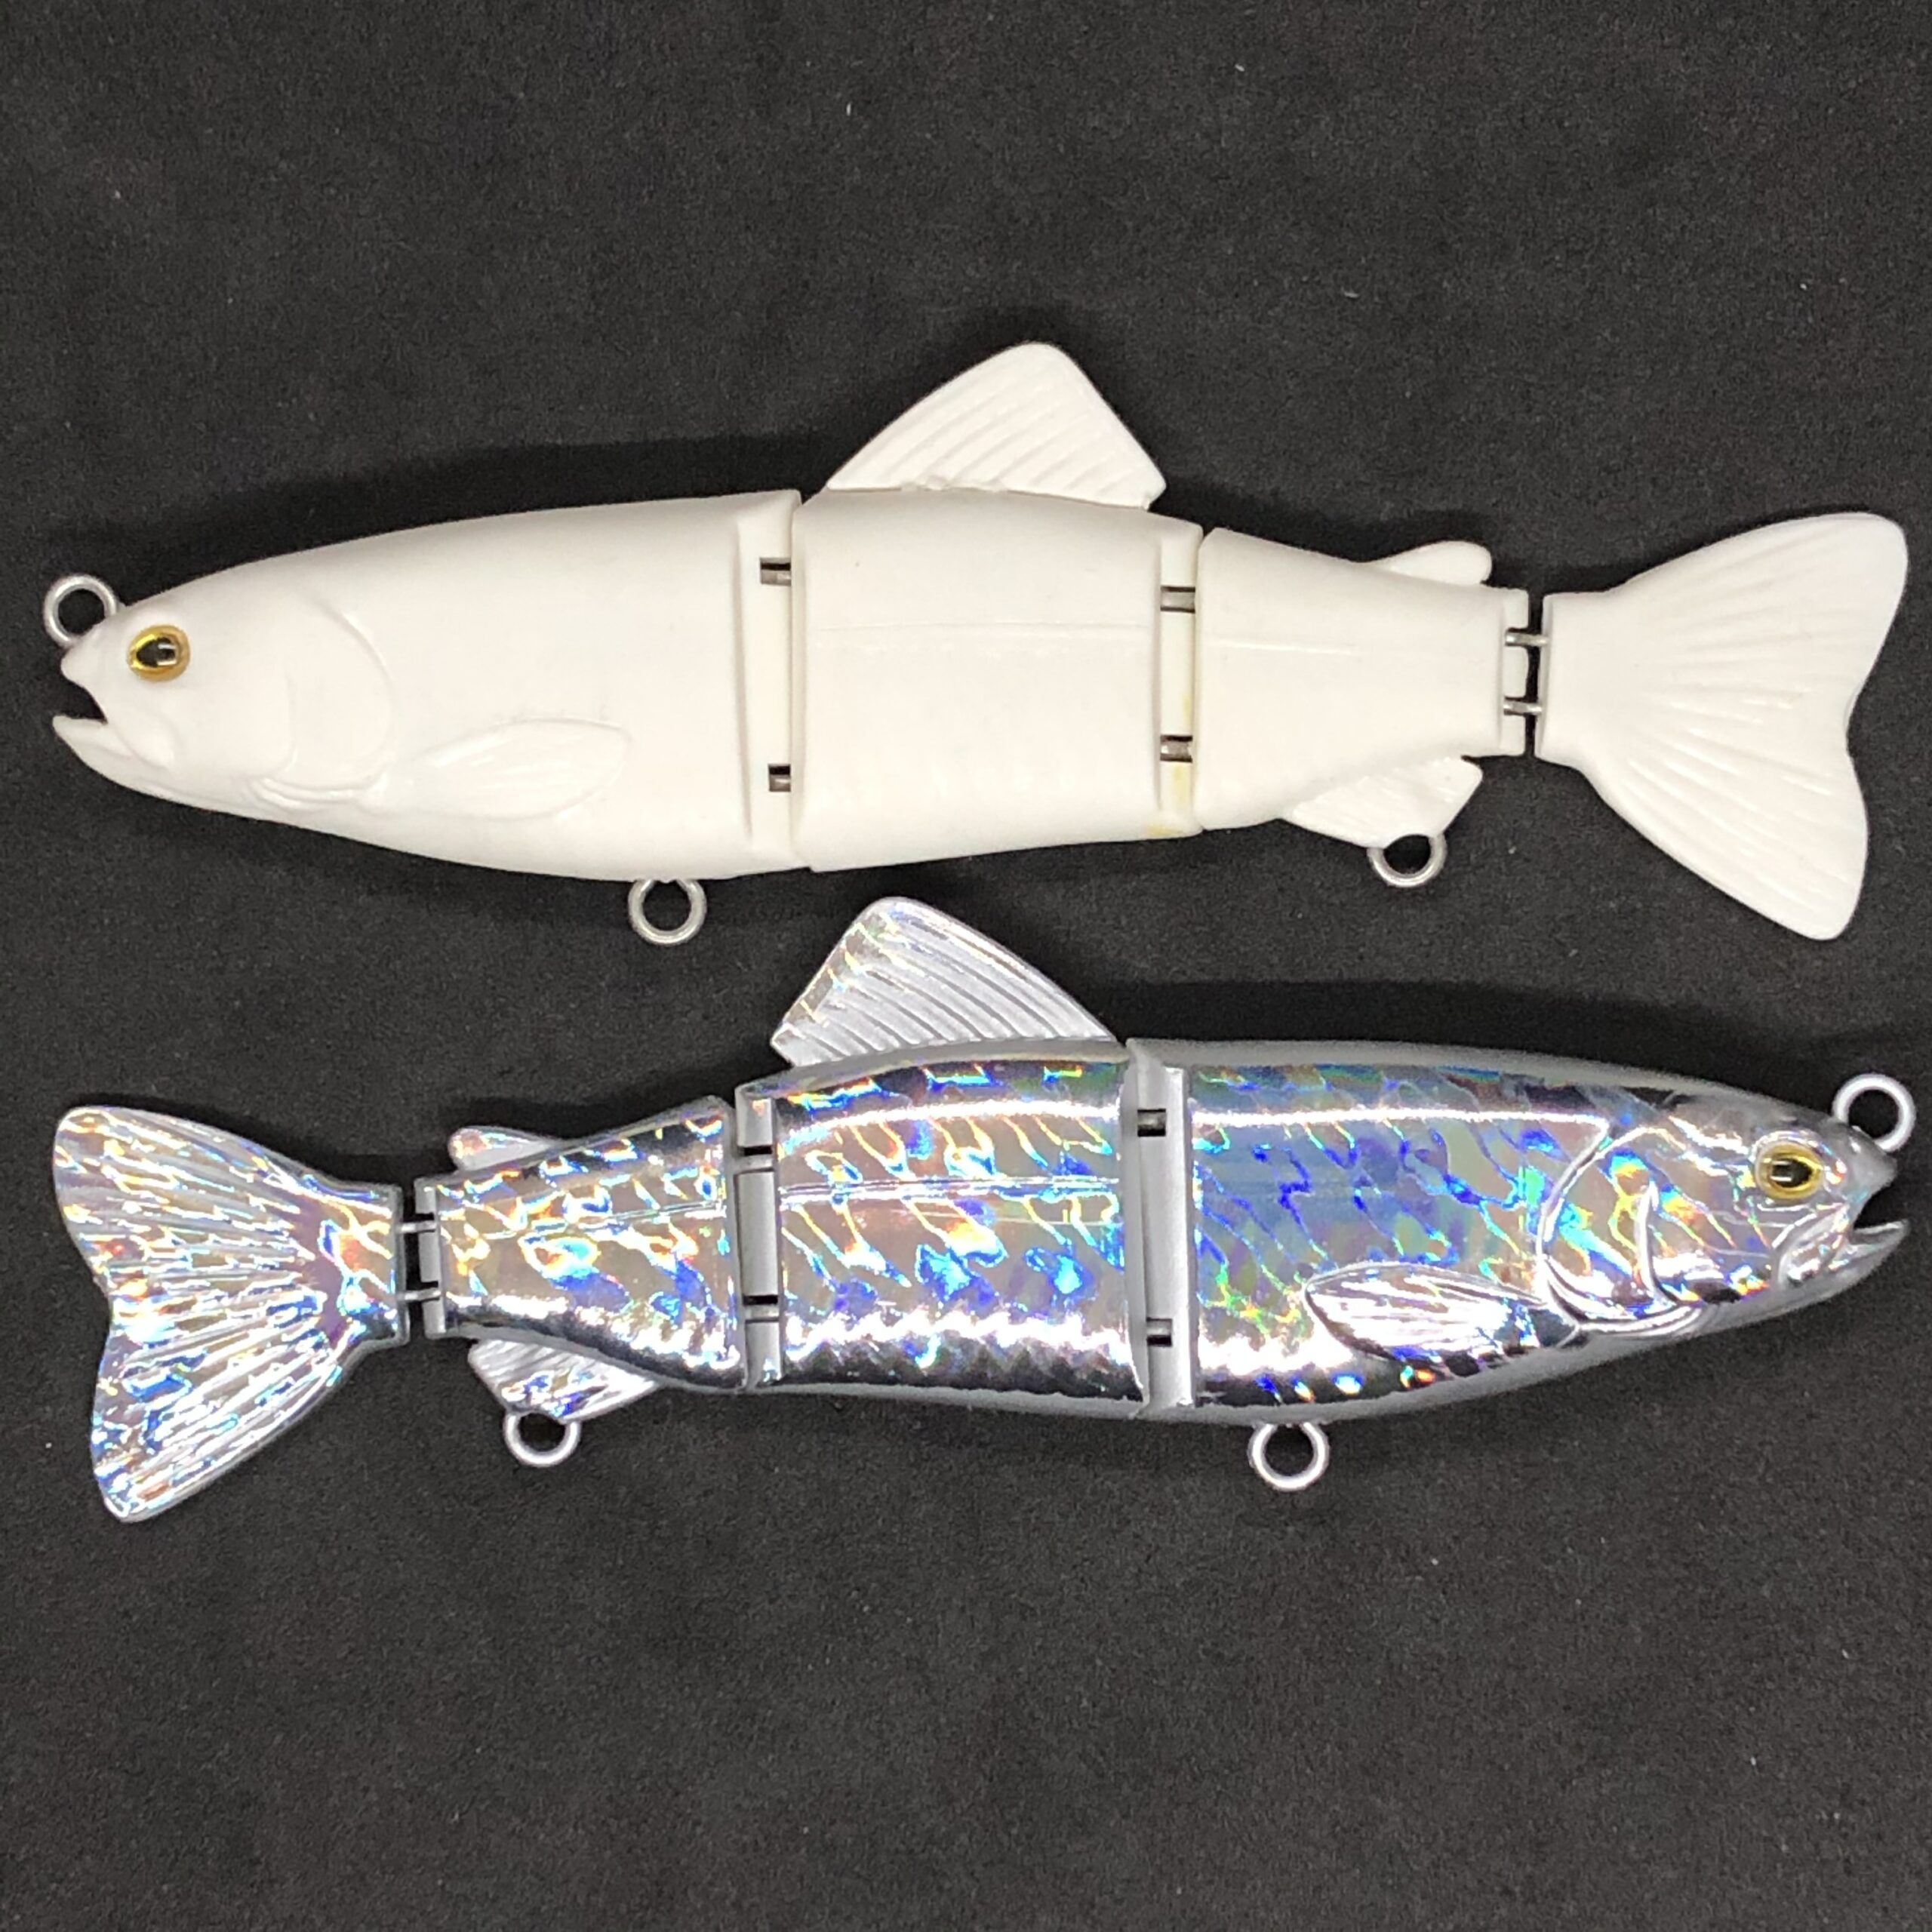 Flat Side Stocker Trout Swimbait (Specialty eyes included)